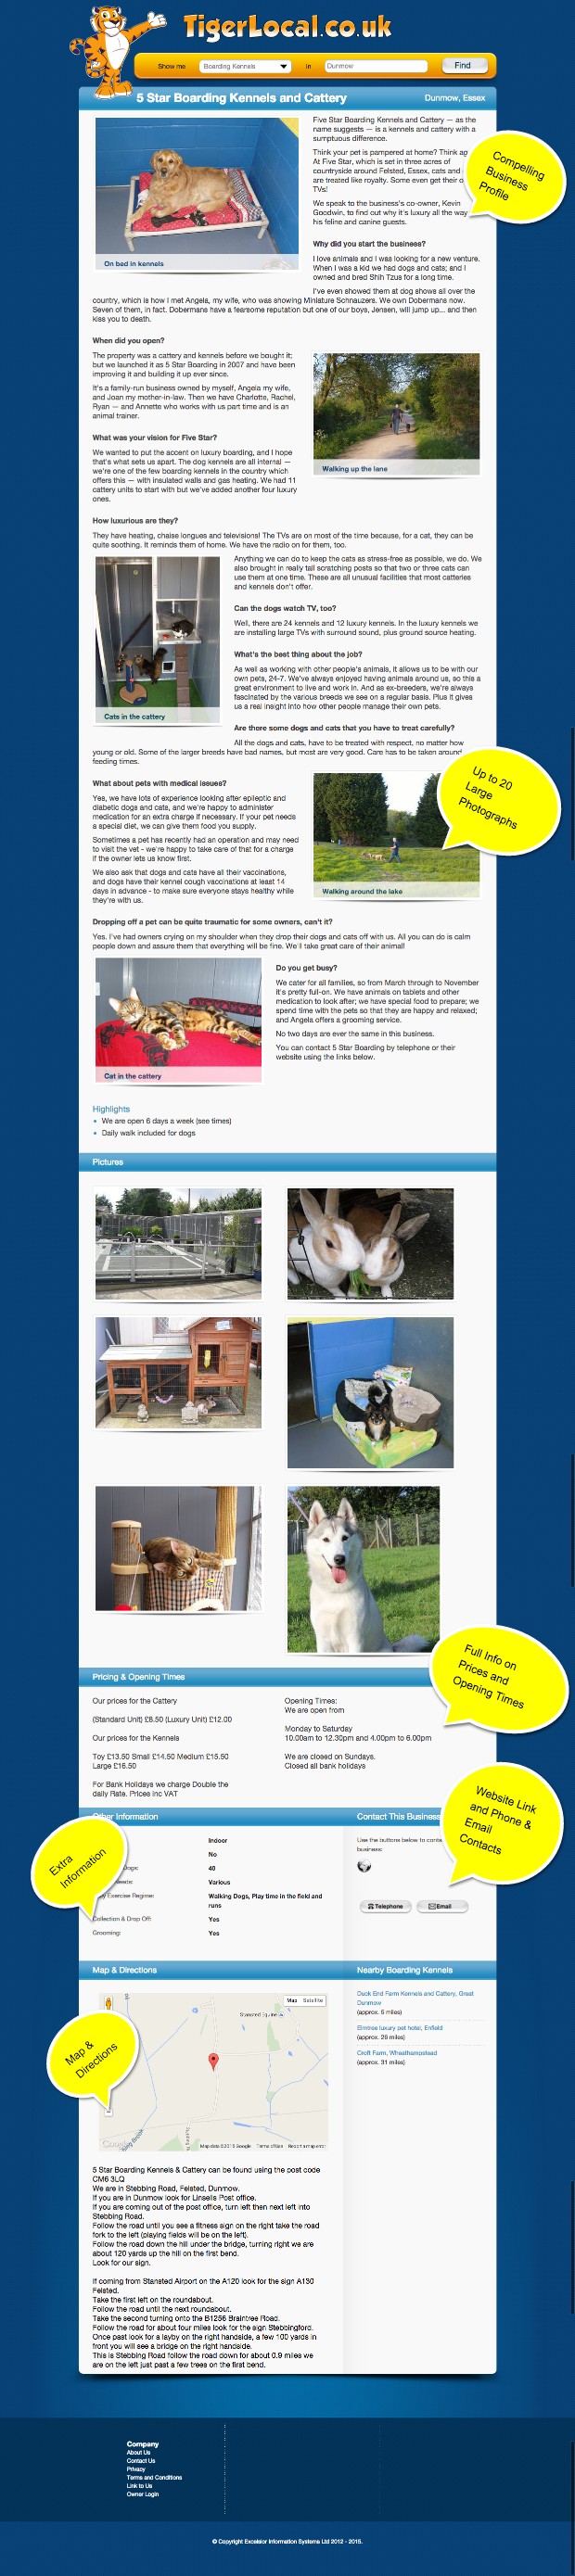 Annotated Screenshot of TigerLocal page for 5 Star Boarding Kennels